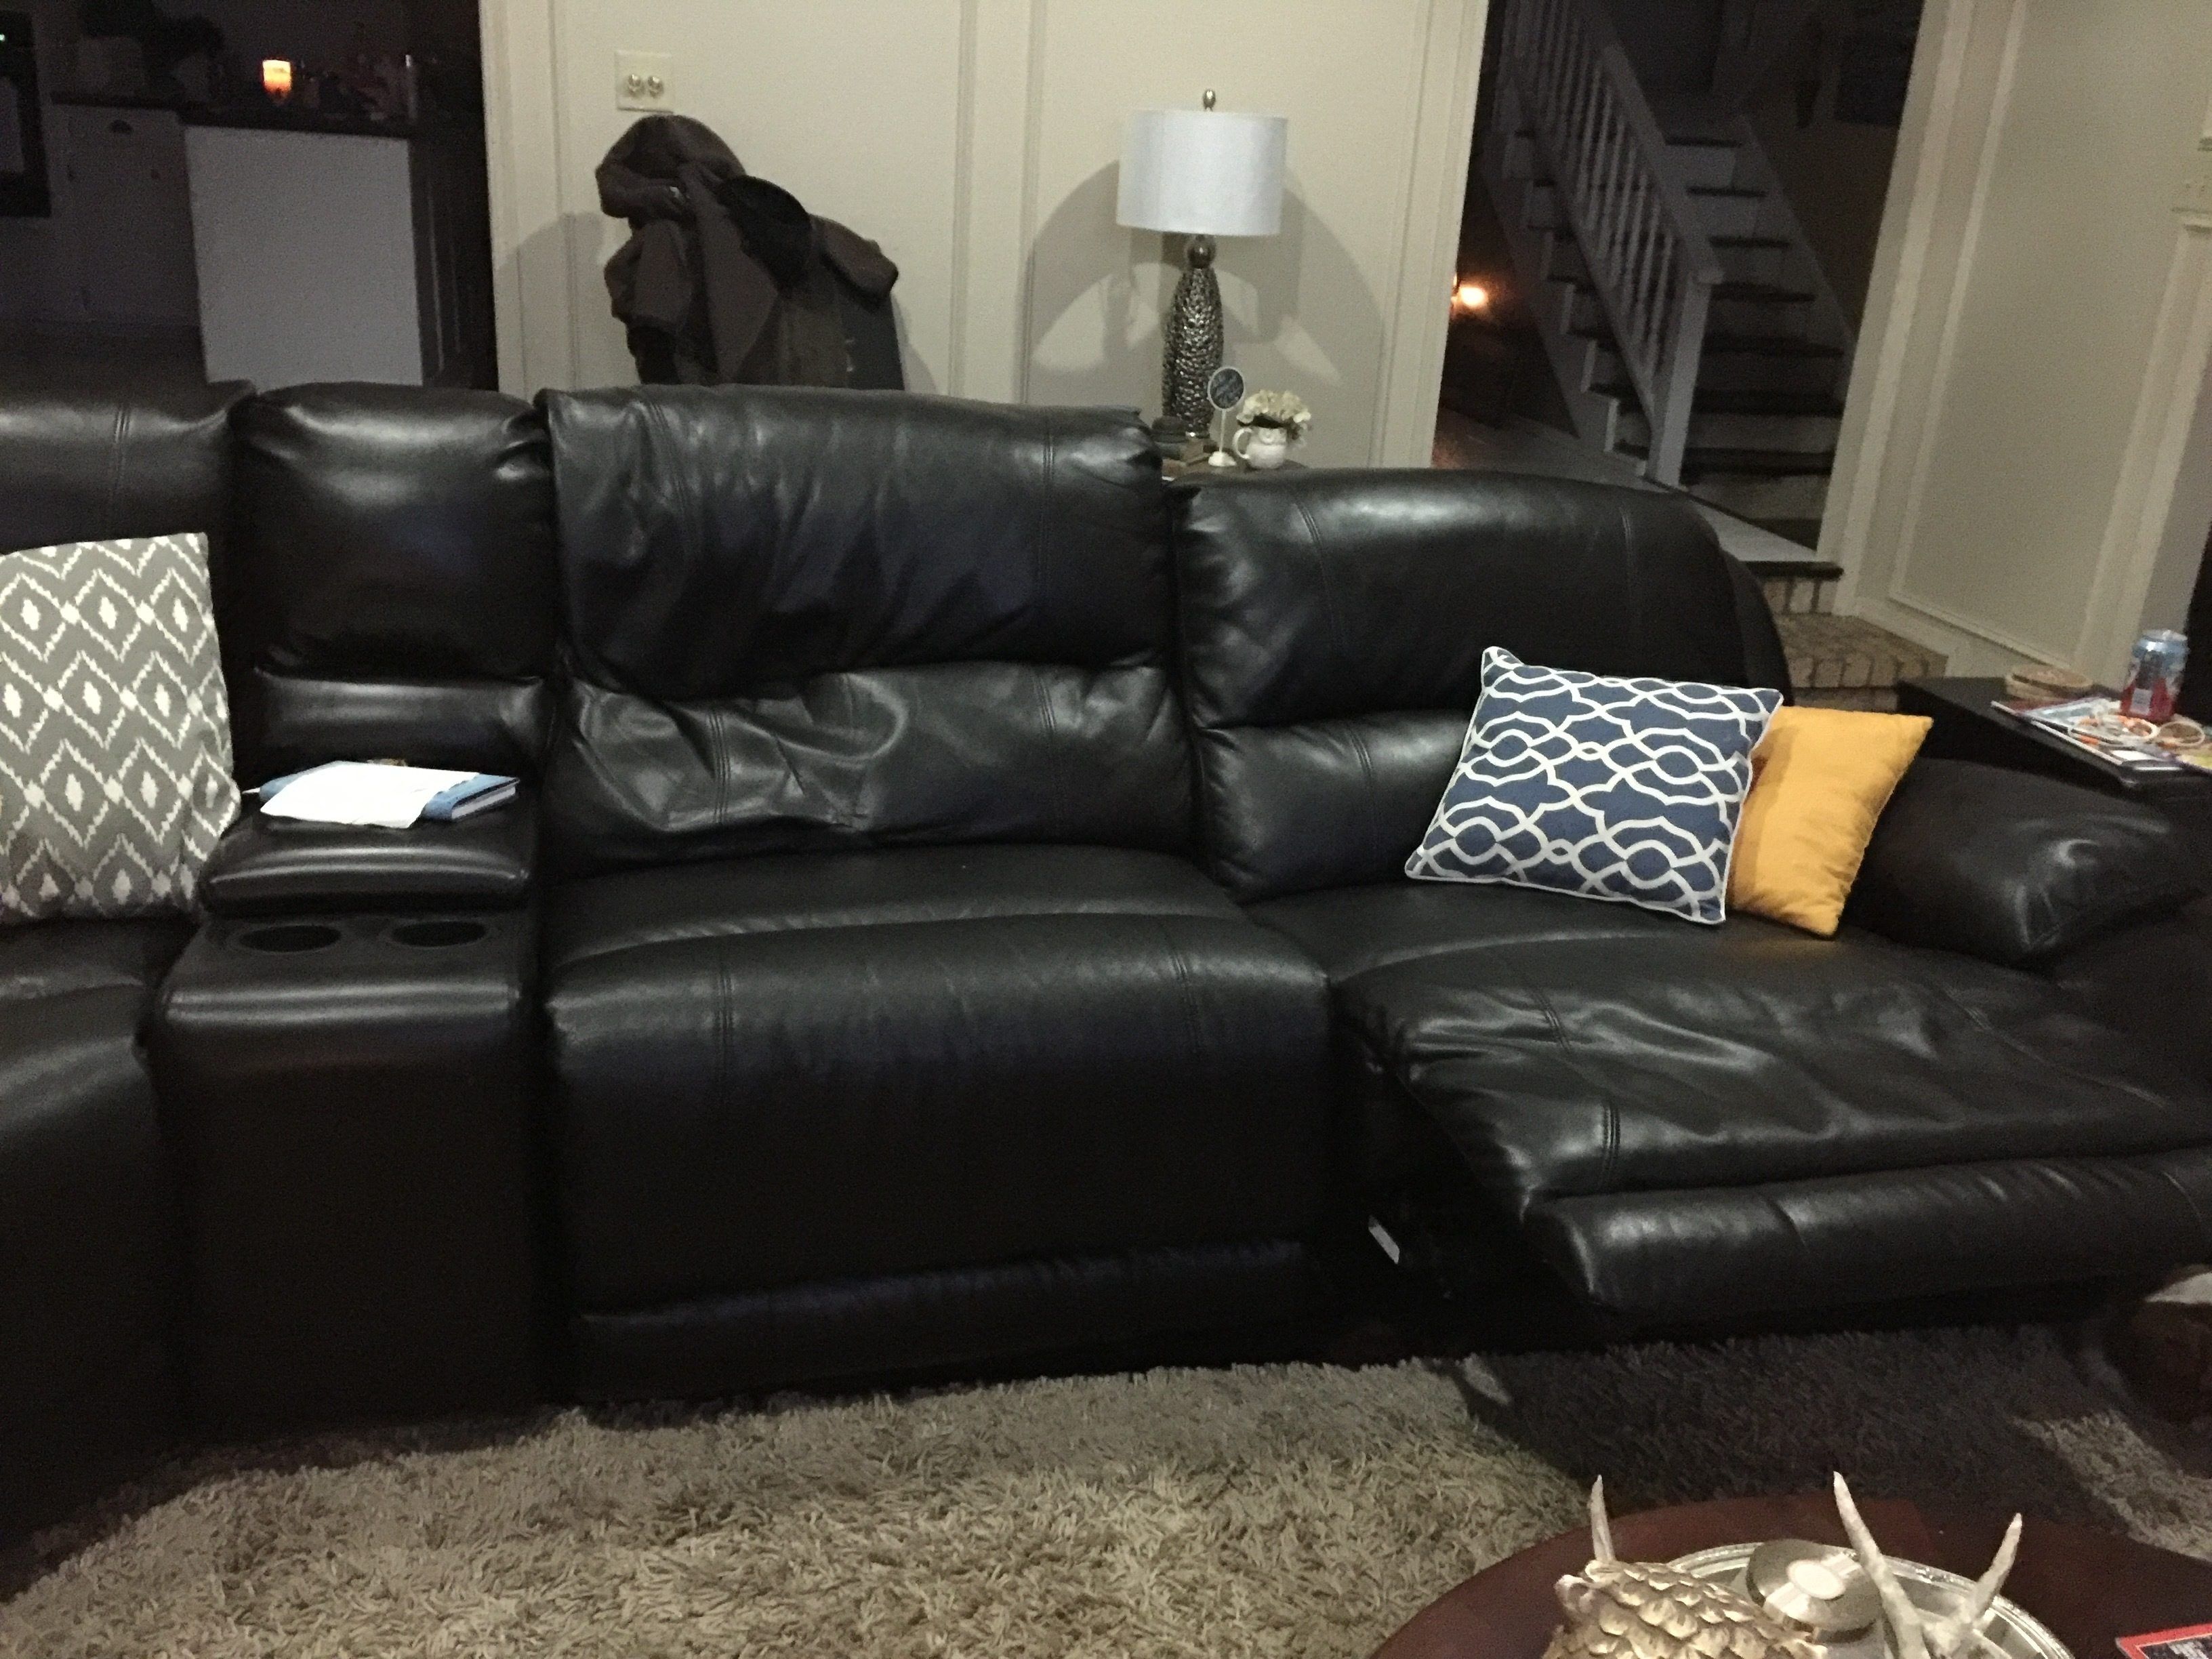 Sectional Sofa: Sectional Sofas On Craigslist Augusta Ga Craigslist Throughout Durham Region Sectional Sofas (View 10 of 10)